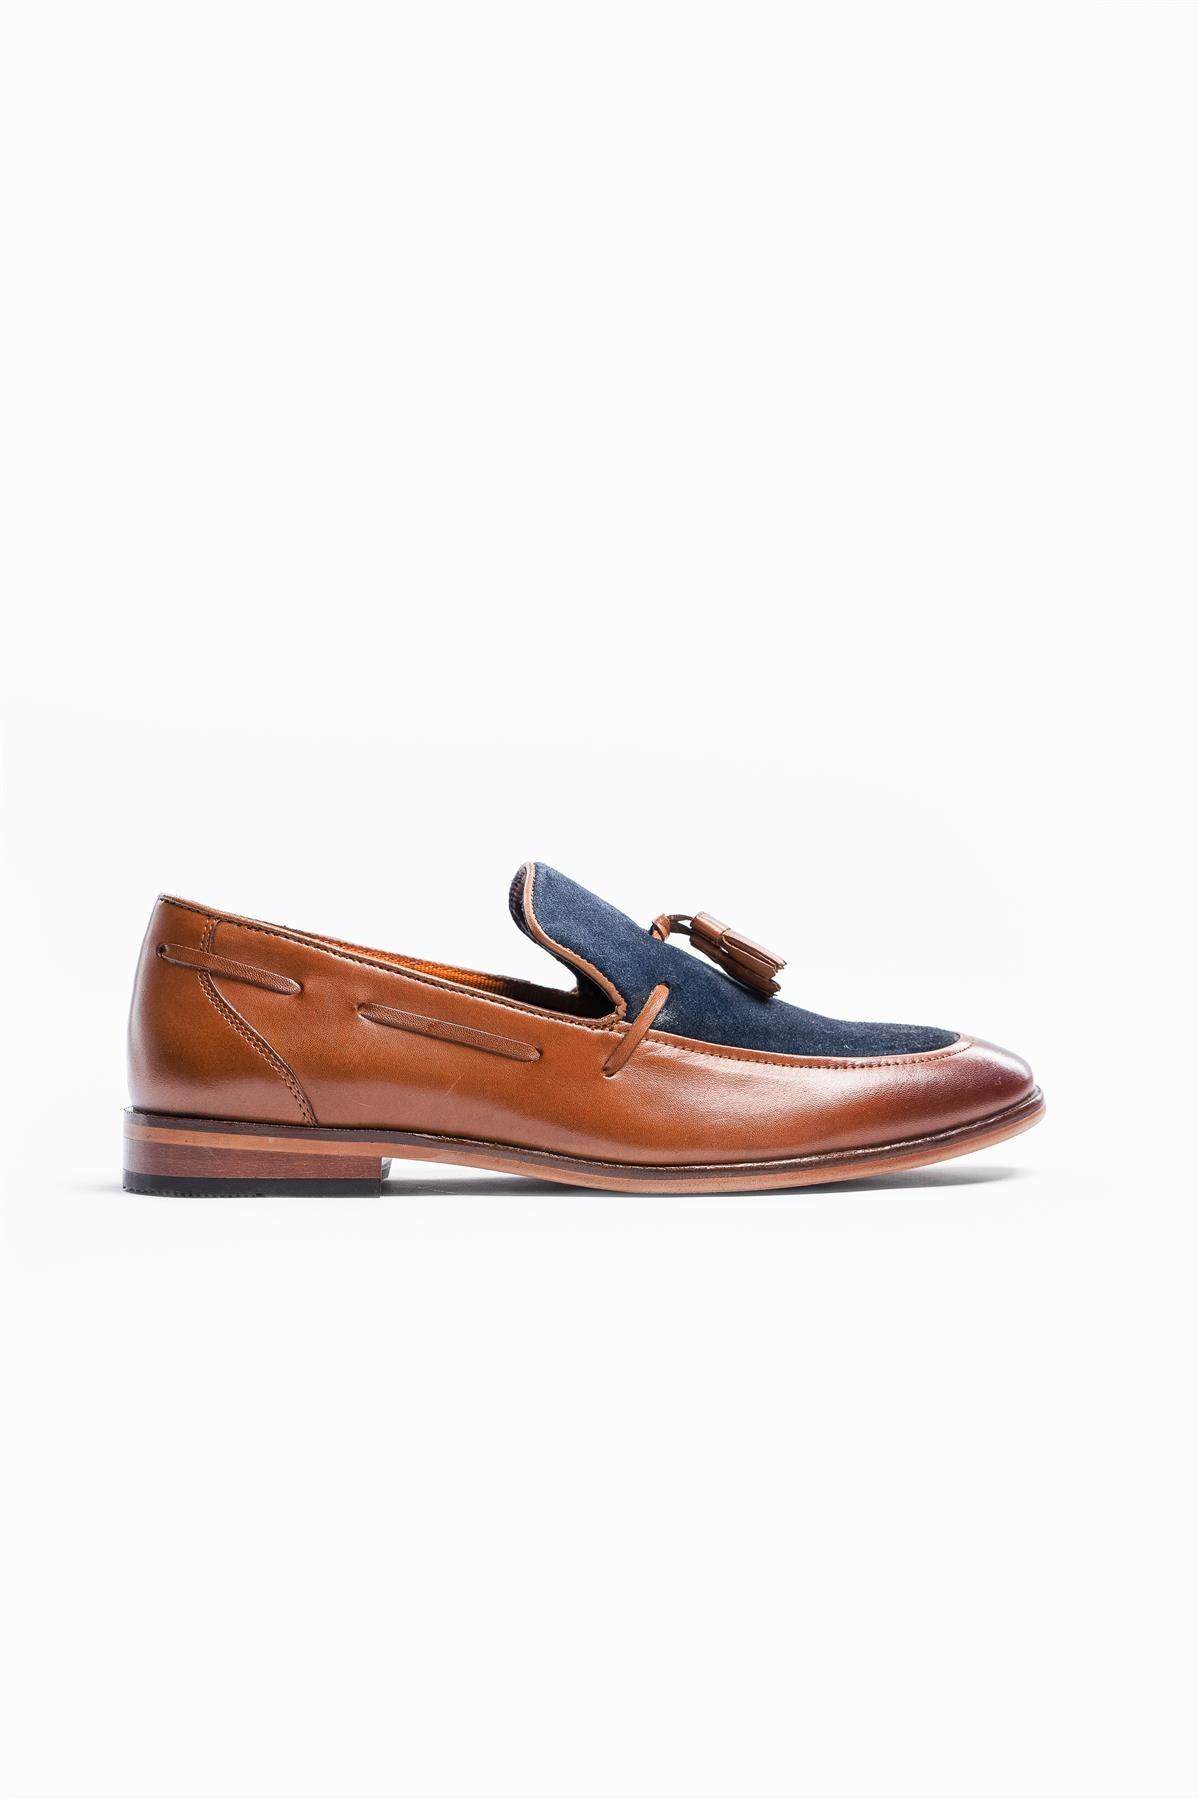 Freemont tan/navy loafers side